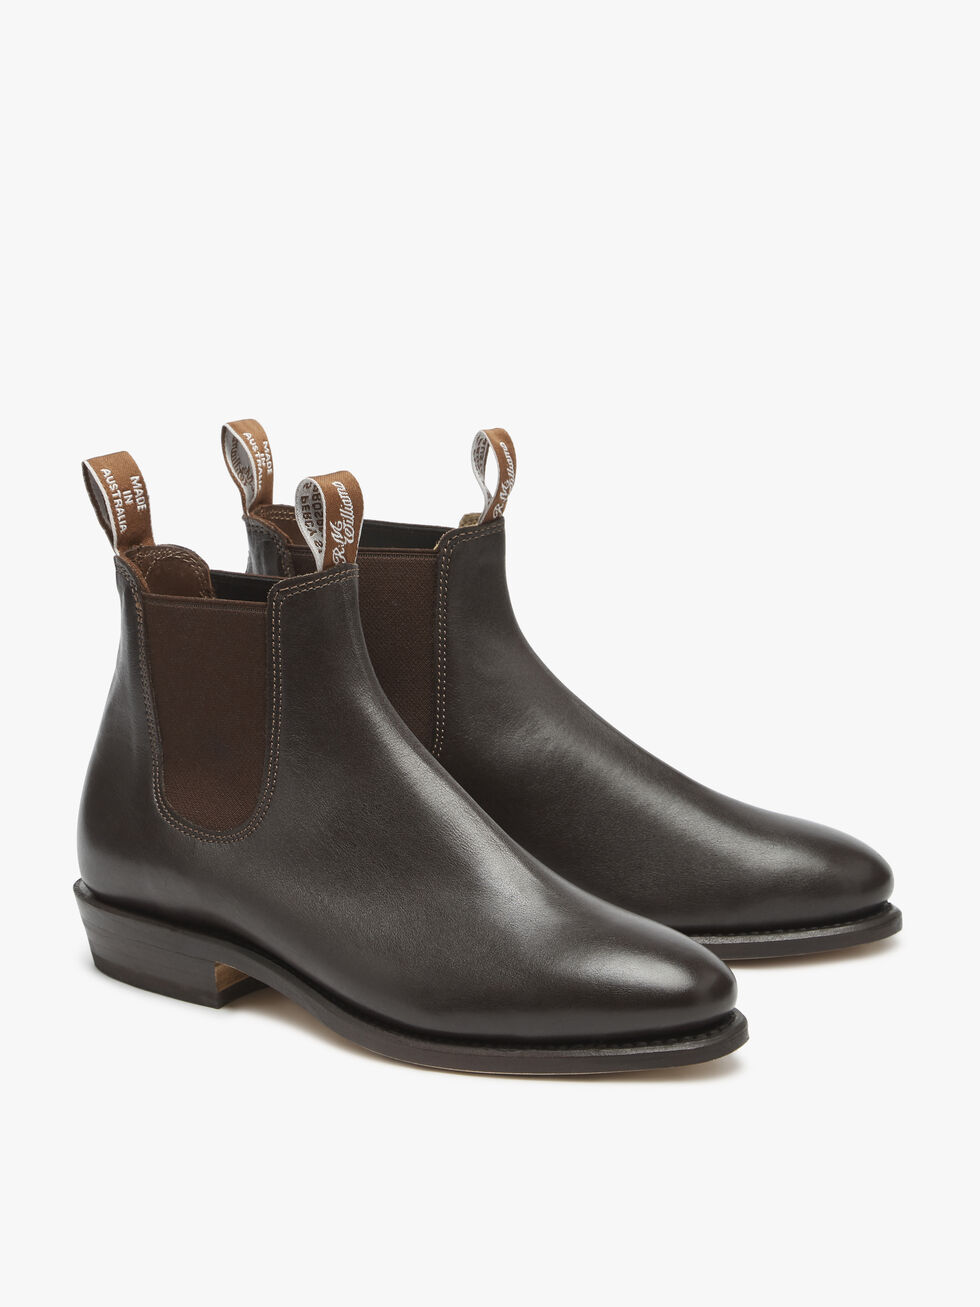 Adelaide Boot - Kangaroo Leather - Women's Boots at R.M.Williams®